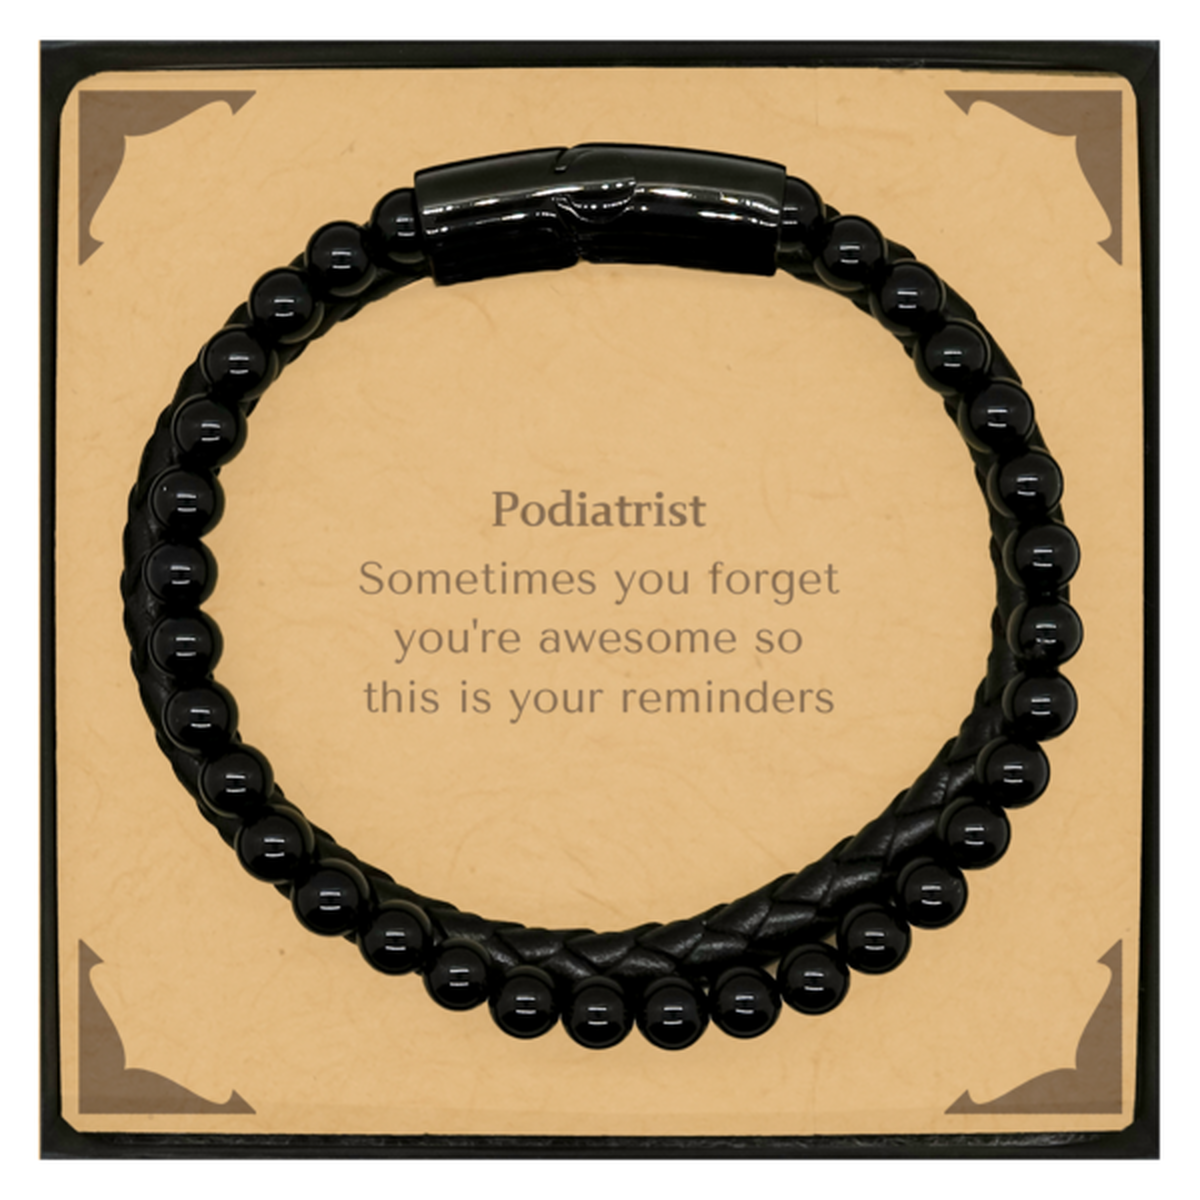 Sentimental Podiatrist Stone Leather Bracelets, Podiatrist Sometimes you forget you're awesome so this is your reminders, Graduation Christmas Birthday Gifts for Podiatrist, Men, Women, Coworkers